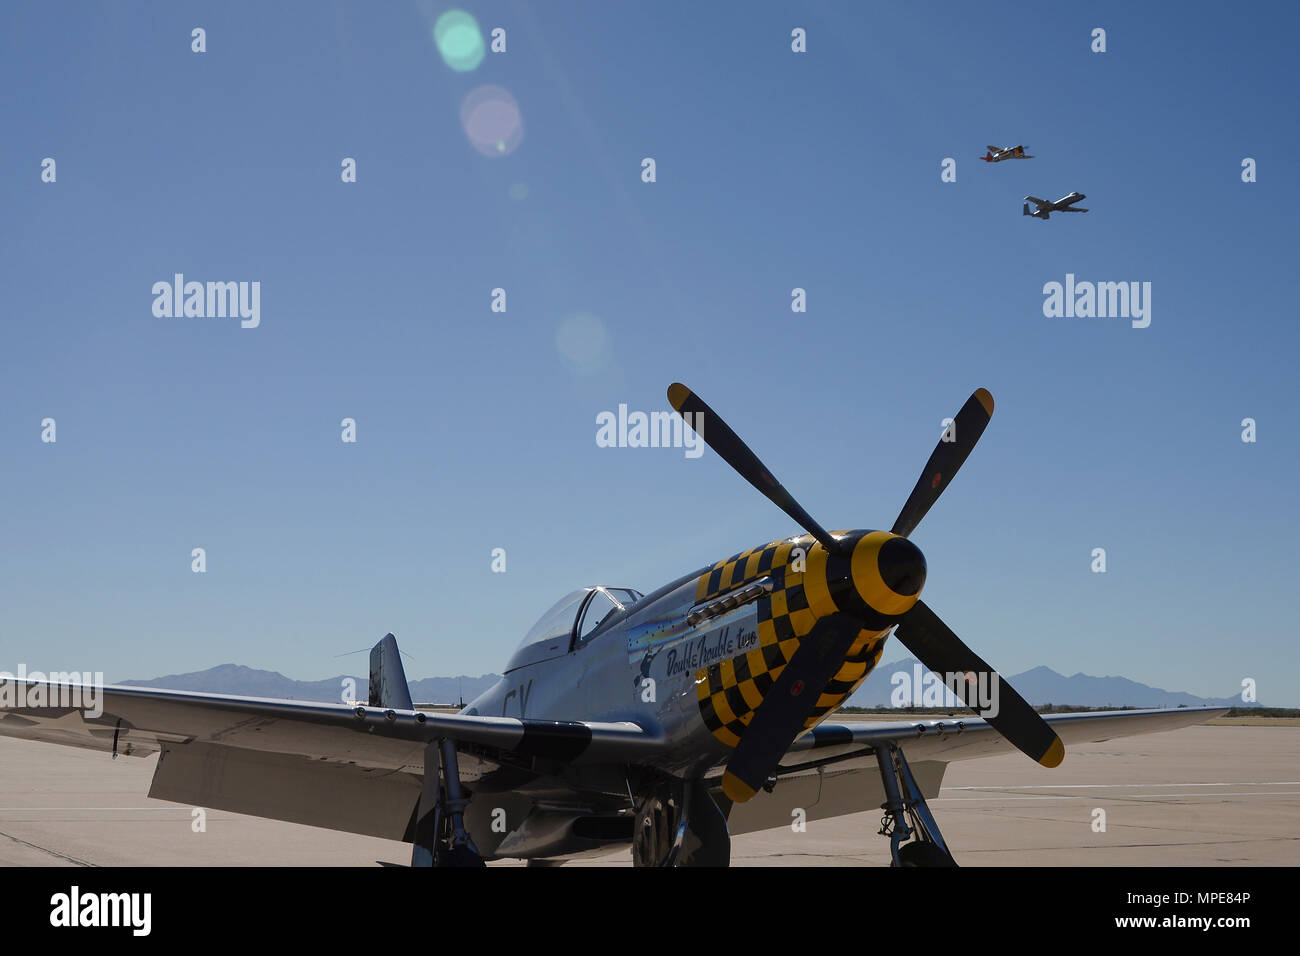 A P-47 Thunderbolt and a U.S. Air Force A-10C Thunderbolt II fly above a P-51 Mustang during the 2017 Heritage Flight Training and Certification Course at Davis-Monthan Air Force Base, Ariz., Feb. 10, 2017. The HFTCC provides civilian and military pilots the opportunity to practice flying in formation together in preparation for future air shows. (U.S. Air Force photo by Senior Airman Ashley N. Steffen) Stock Photo